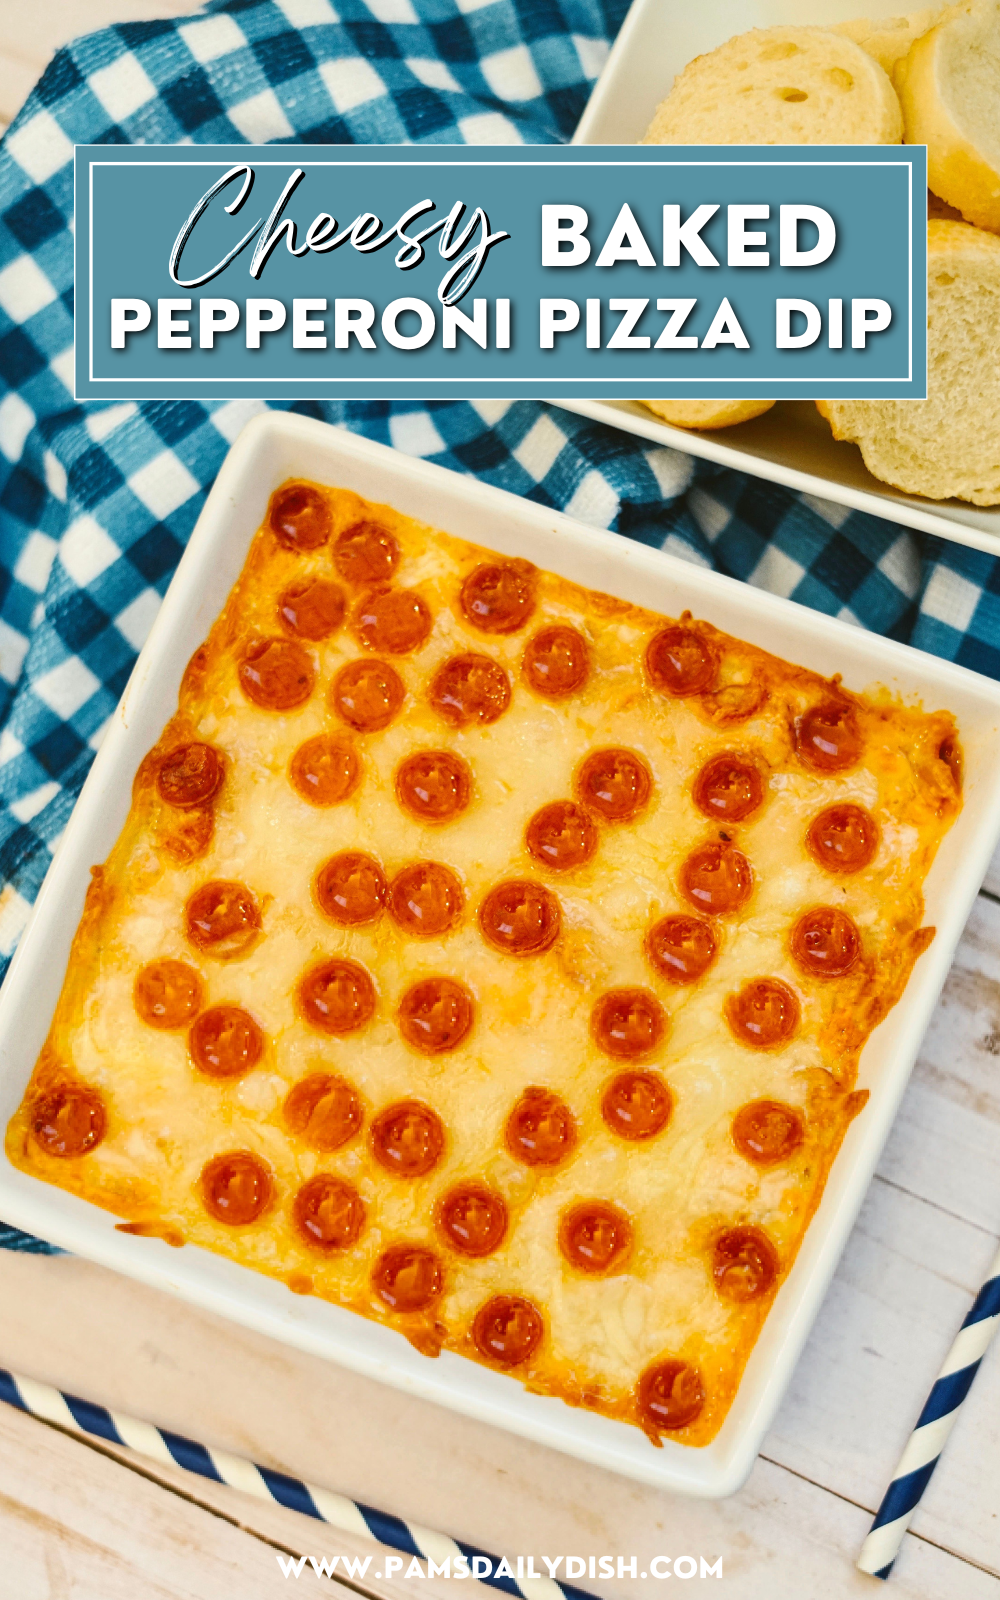 This cheesy baked pepperoni pizza party dip is a super simple and easy appetizer to make for your next gathering. It's always a huge hit and tastes so delicious! The best part is that this app recipe only requires four simple ingredients and takes under 20 minutes to make. Share it with your friends and family. It'll be a new favorite! via @skinnydesserts